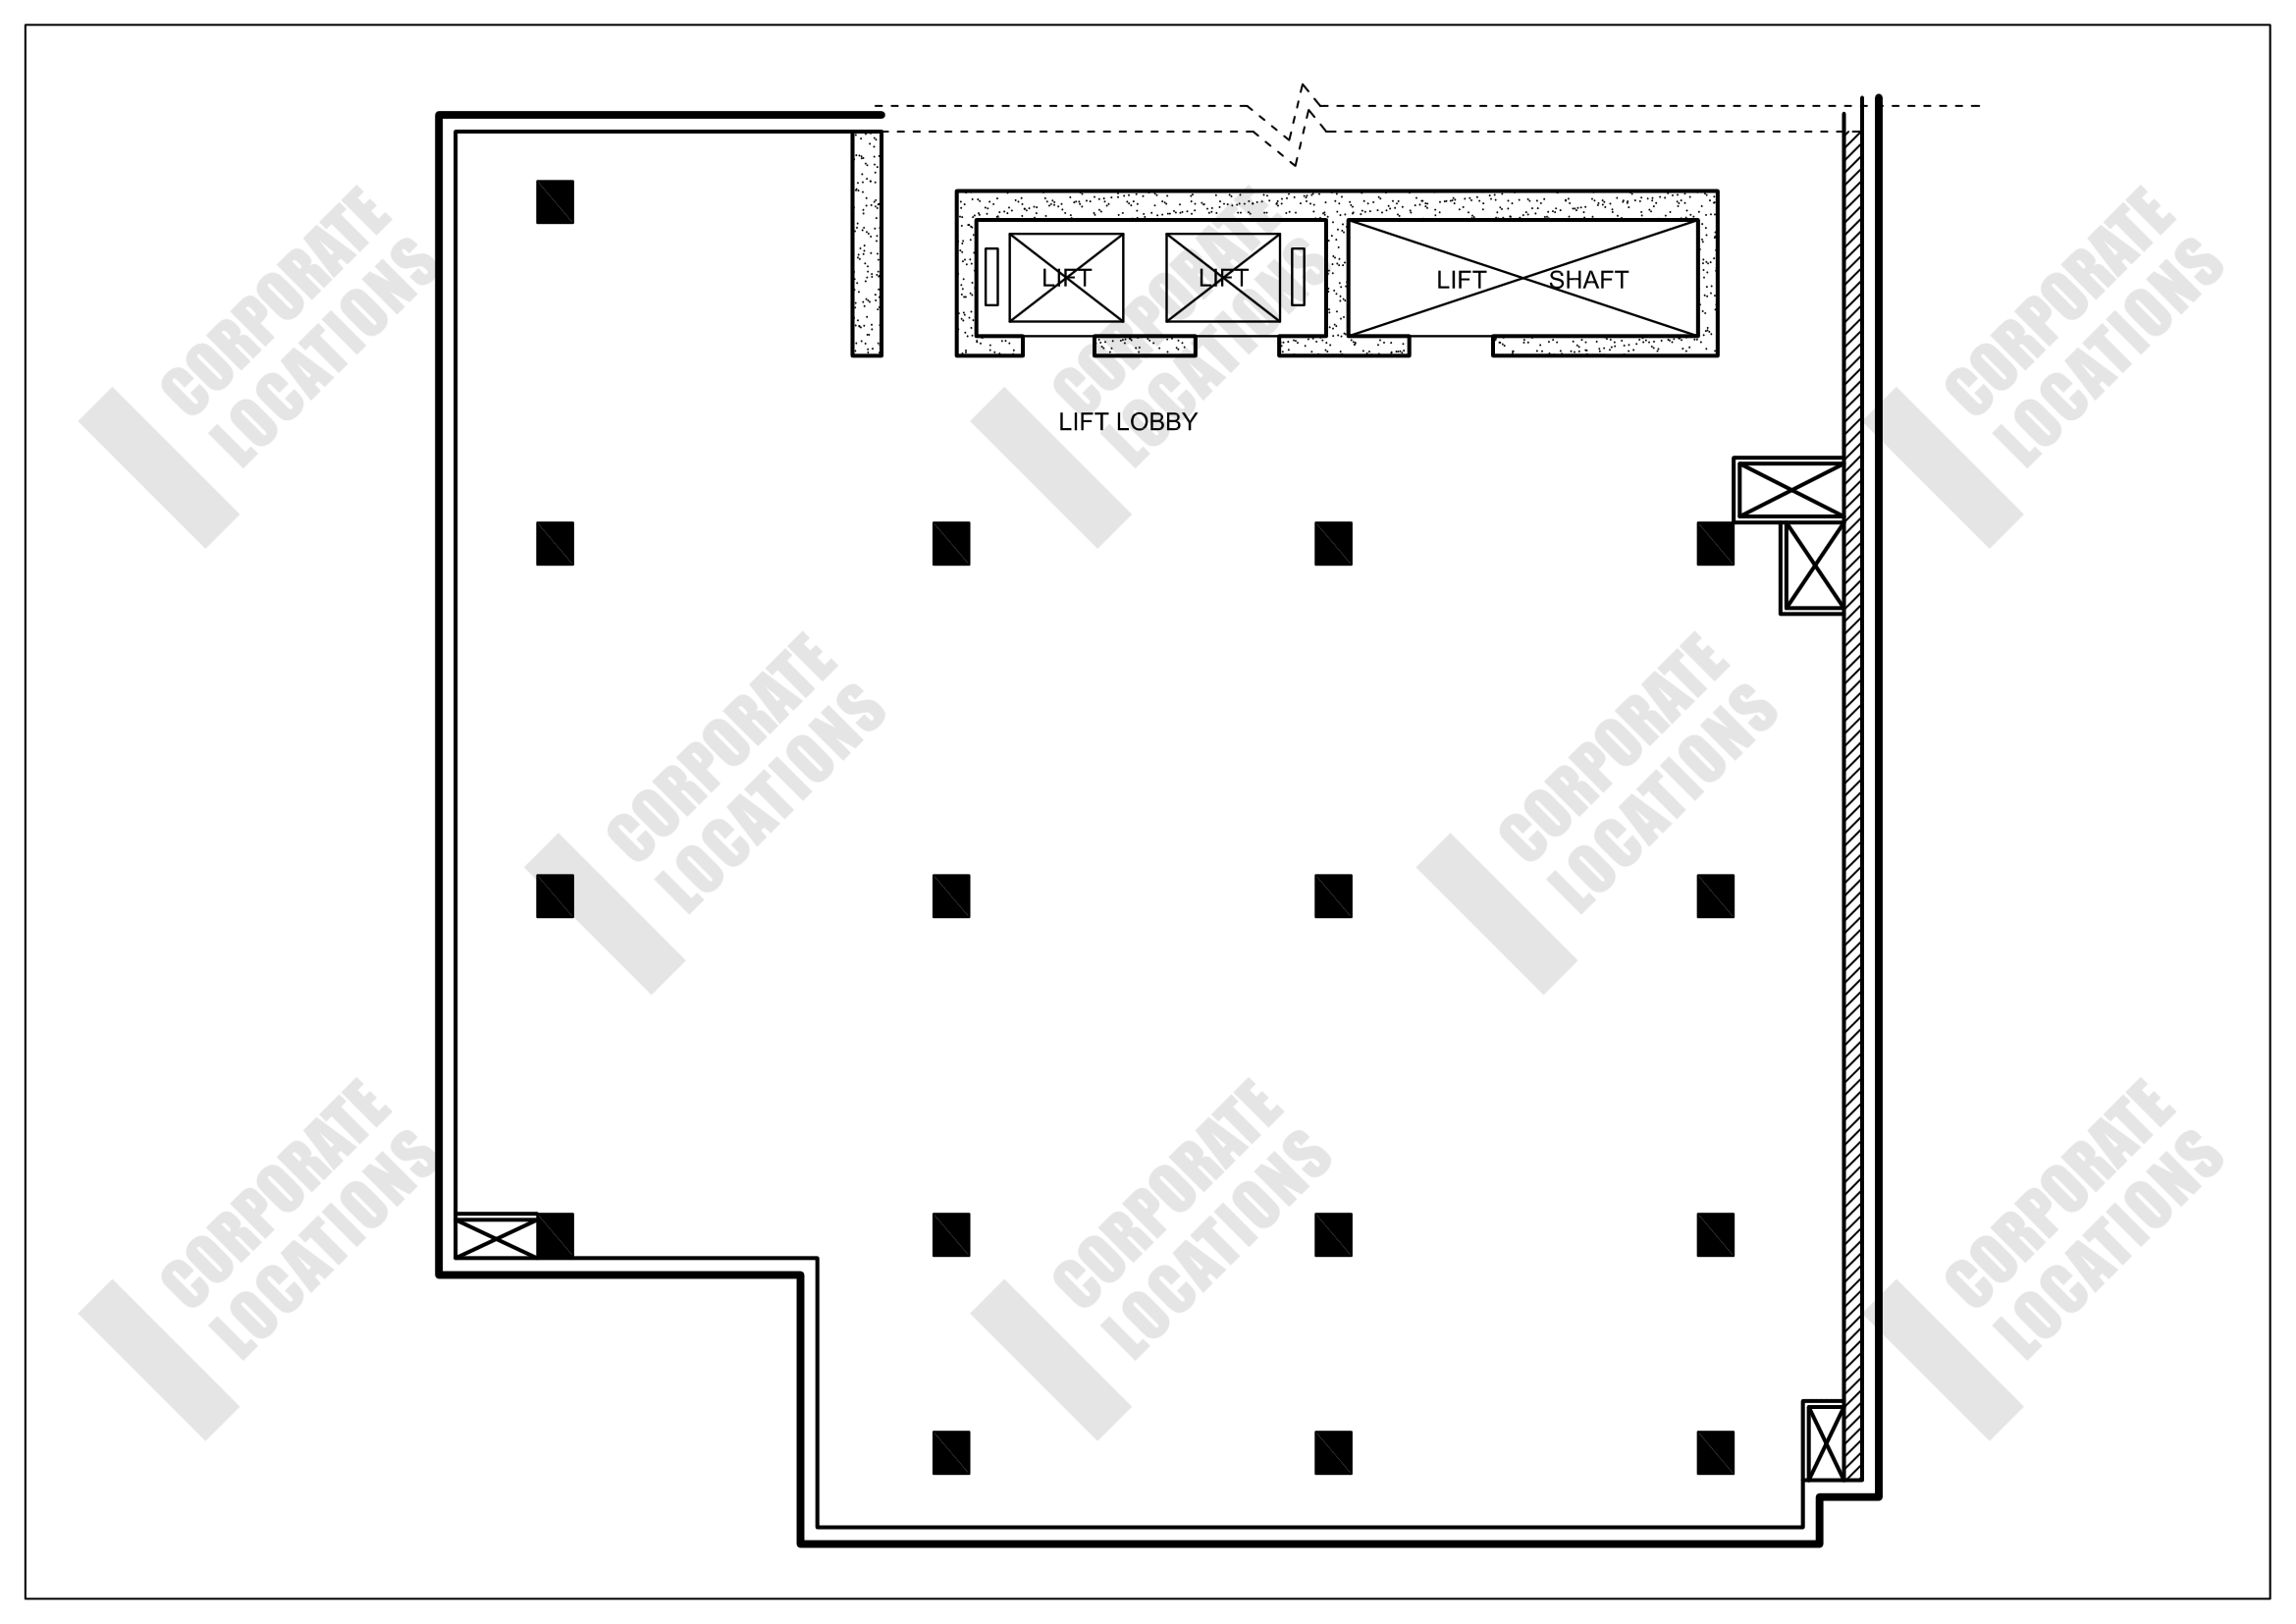 Floorplan The Chinese Bank Building